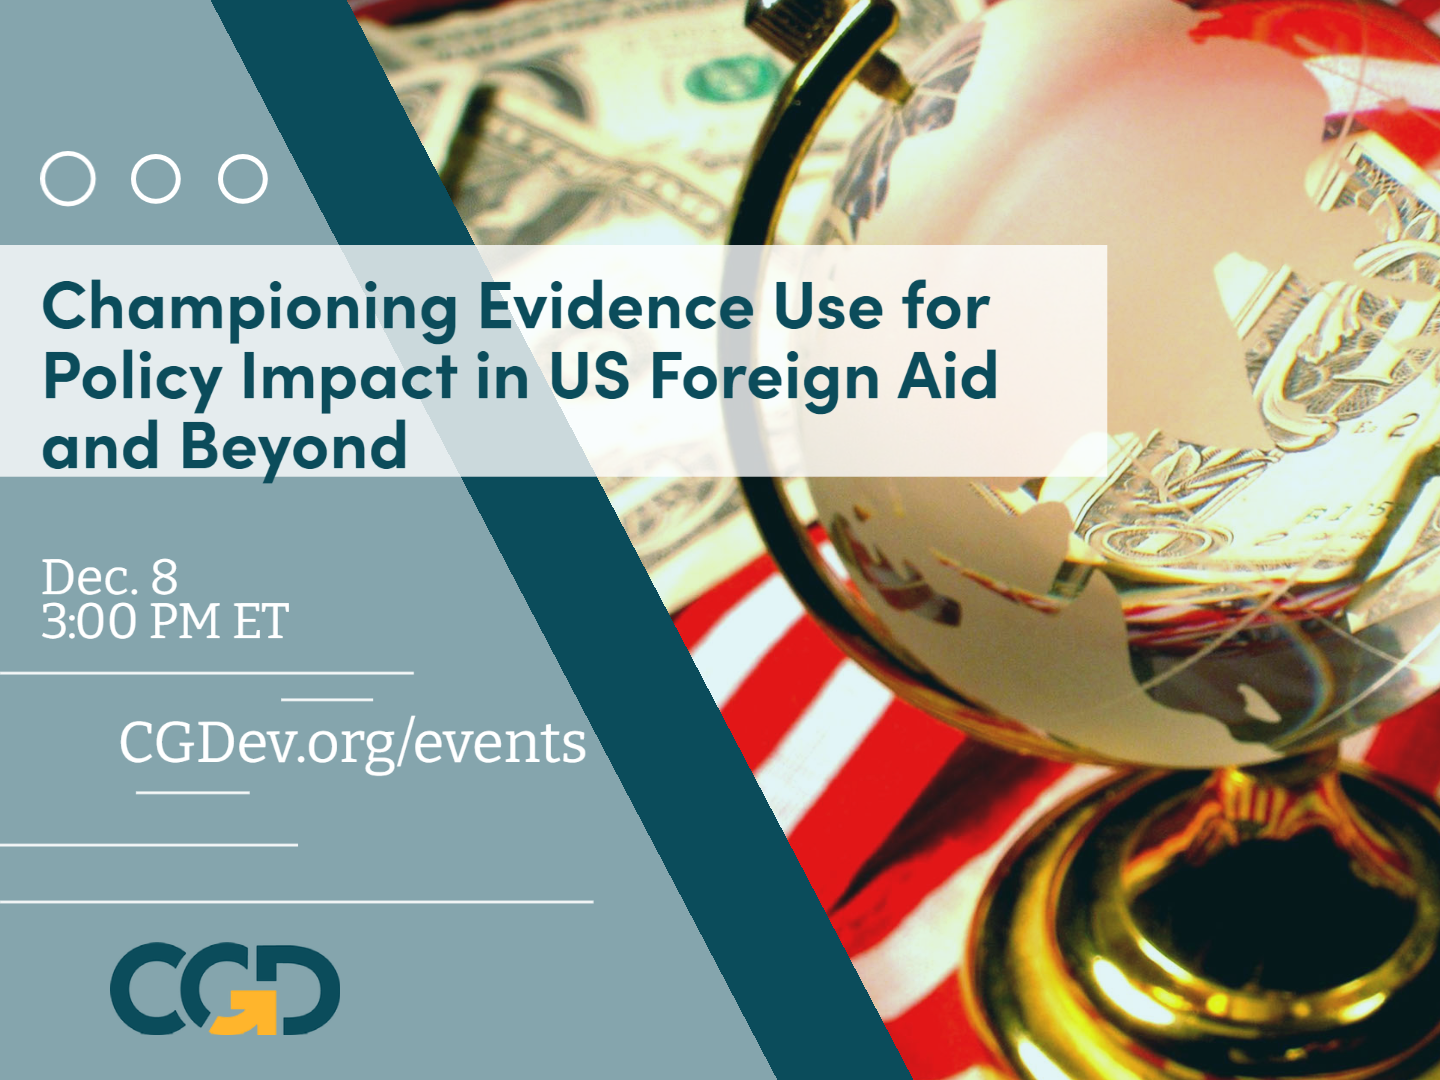 Championing Evidence Use for Policy Impact in US Foreign Aid and Beyond, Dec. 8, 3 PM ET